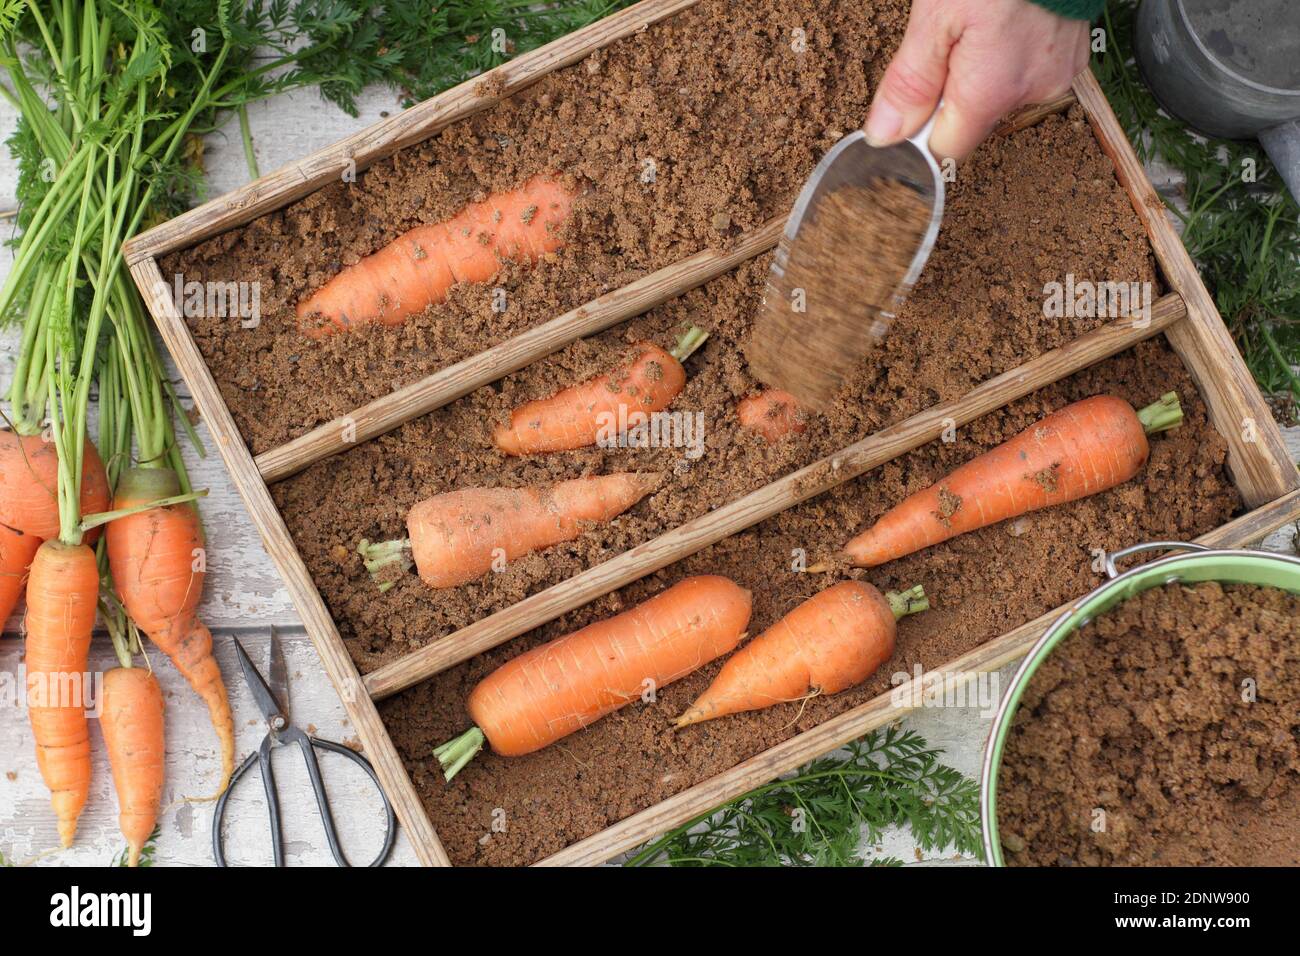 Daucus carota 'Autumn King'. Storing freshly harvested homegrown carrots in moist horticultural sand in a wooden crate. UK Stock Photo